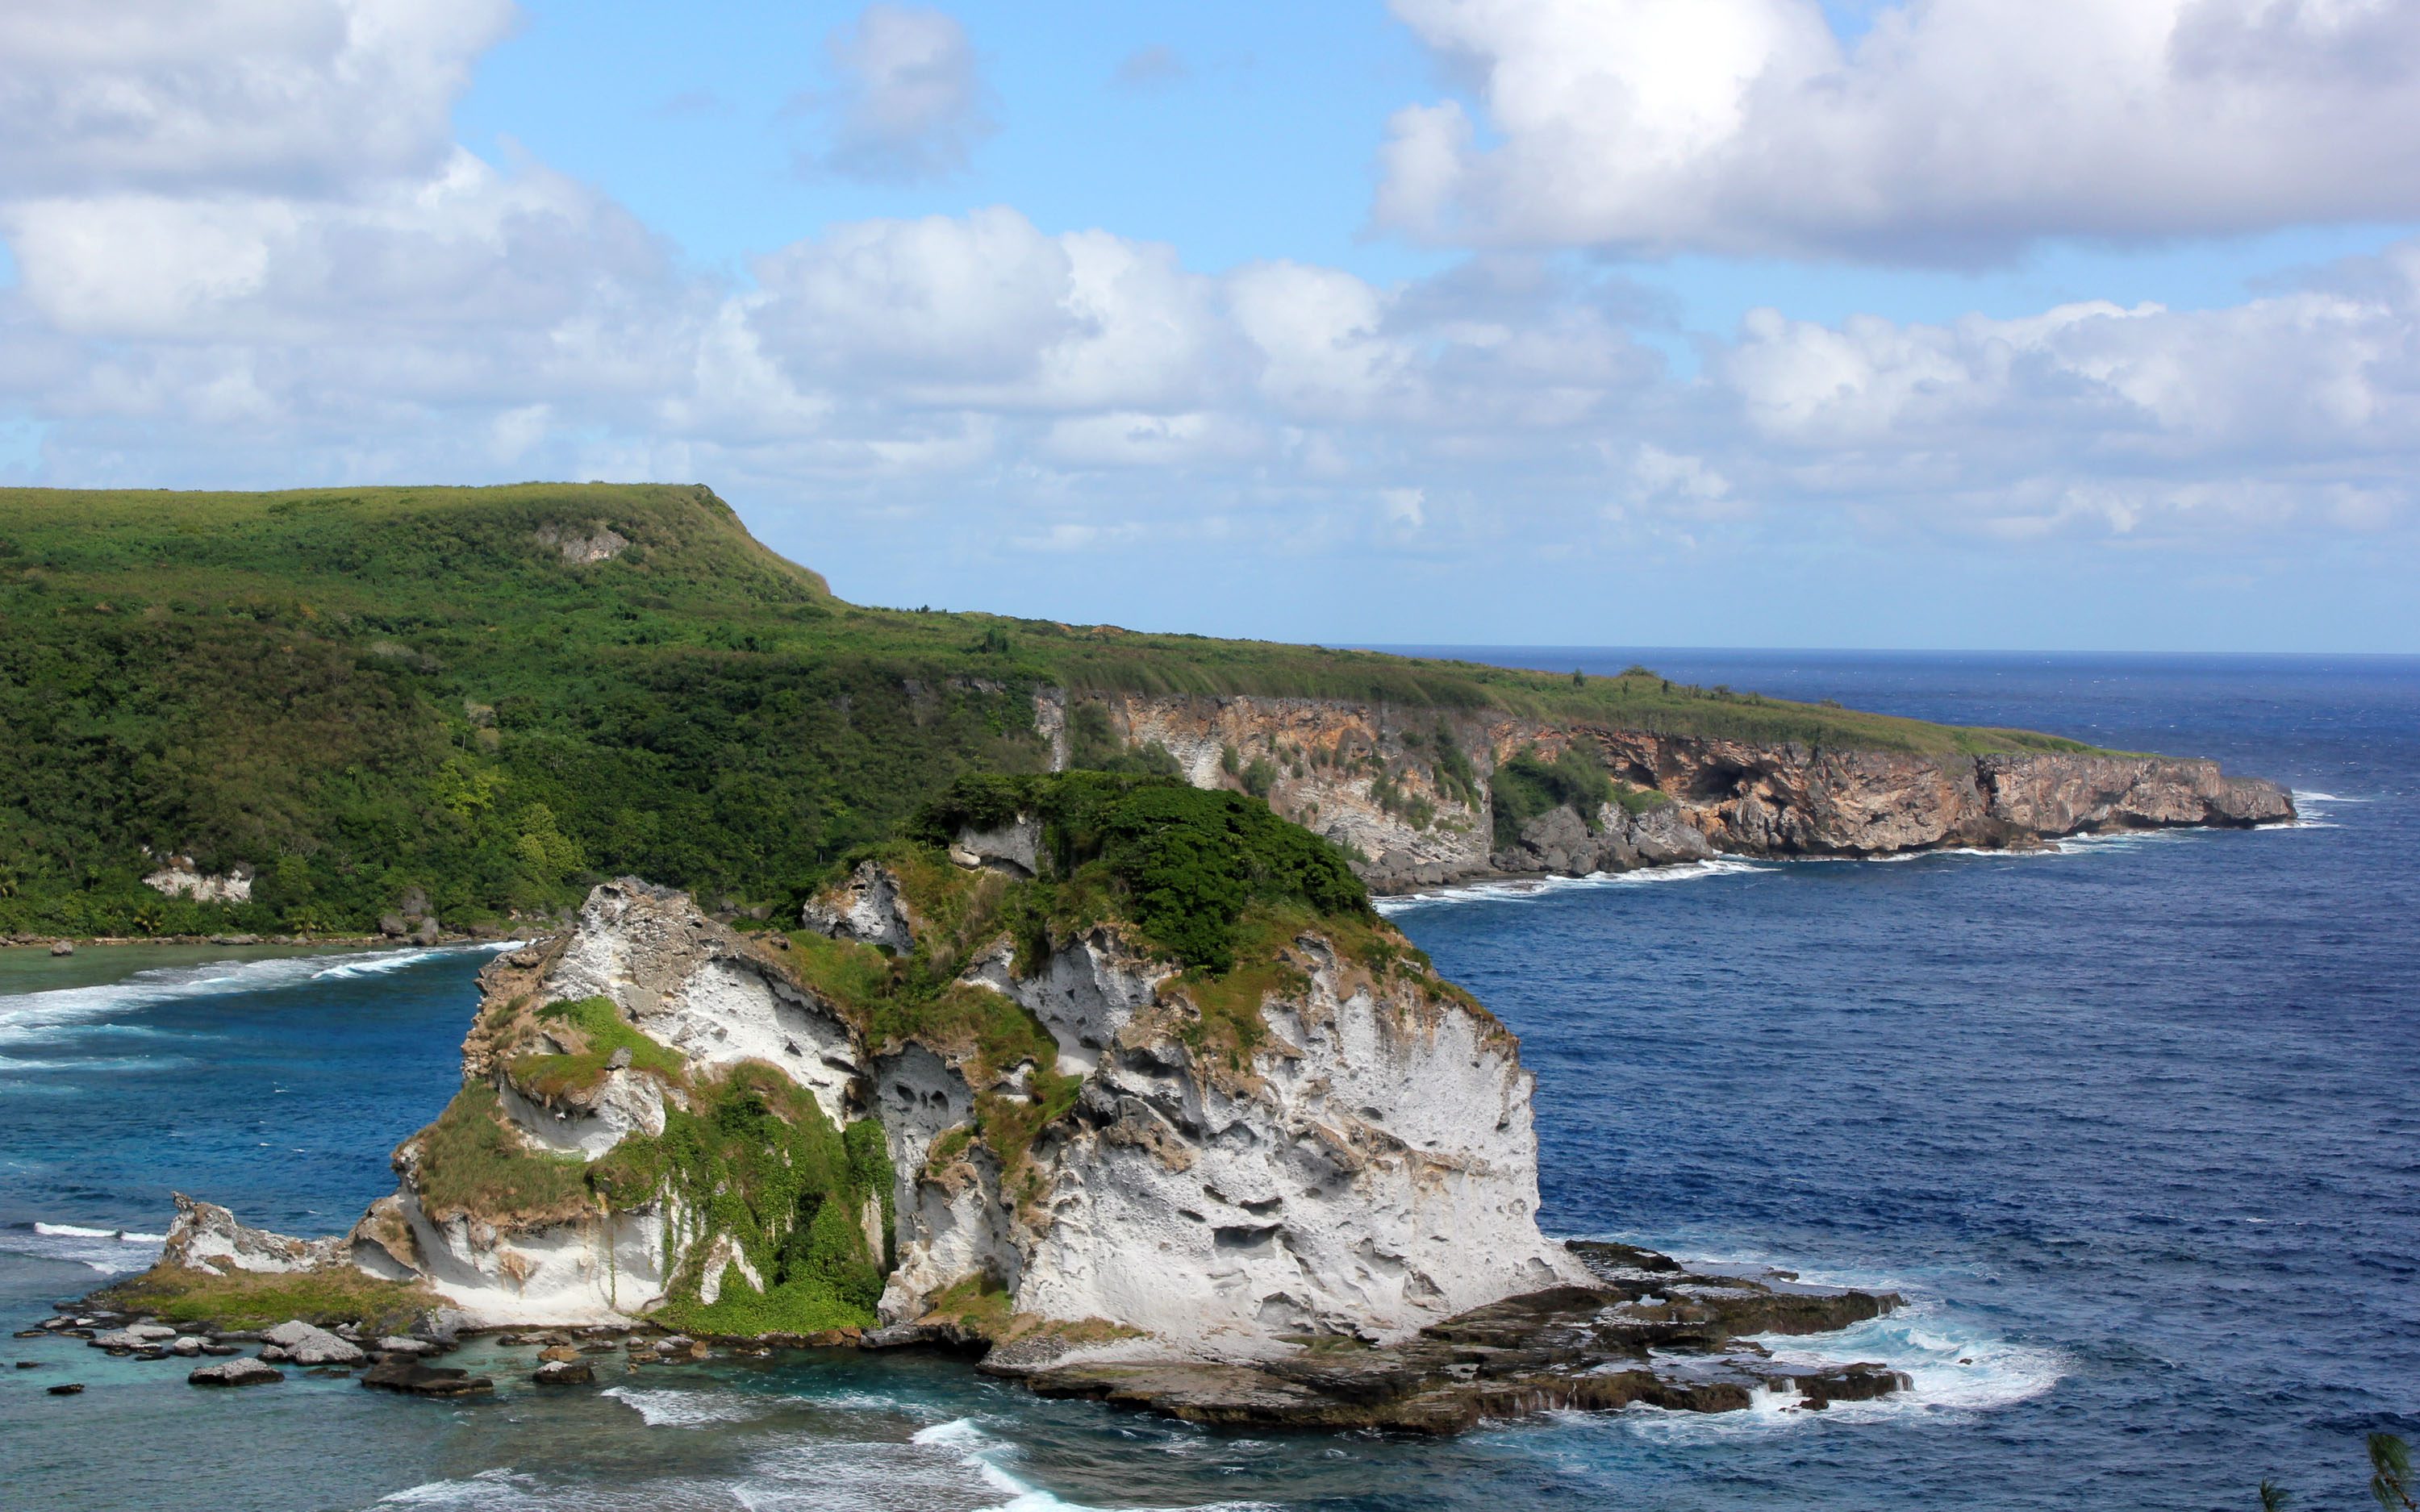 BIRD ISLAND. Climb up an overlook to enjoy the view of this island, which is home to thousands of birds. Photo courtesy of Marianas Visitors Authority 